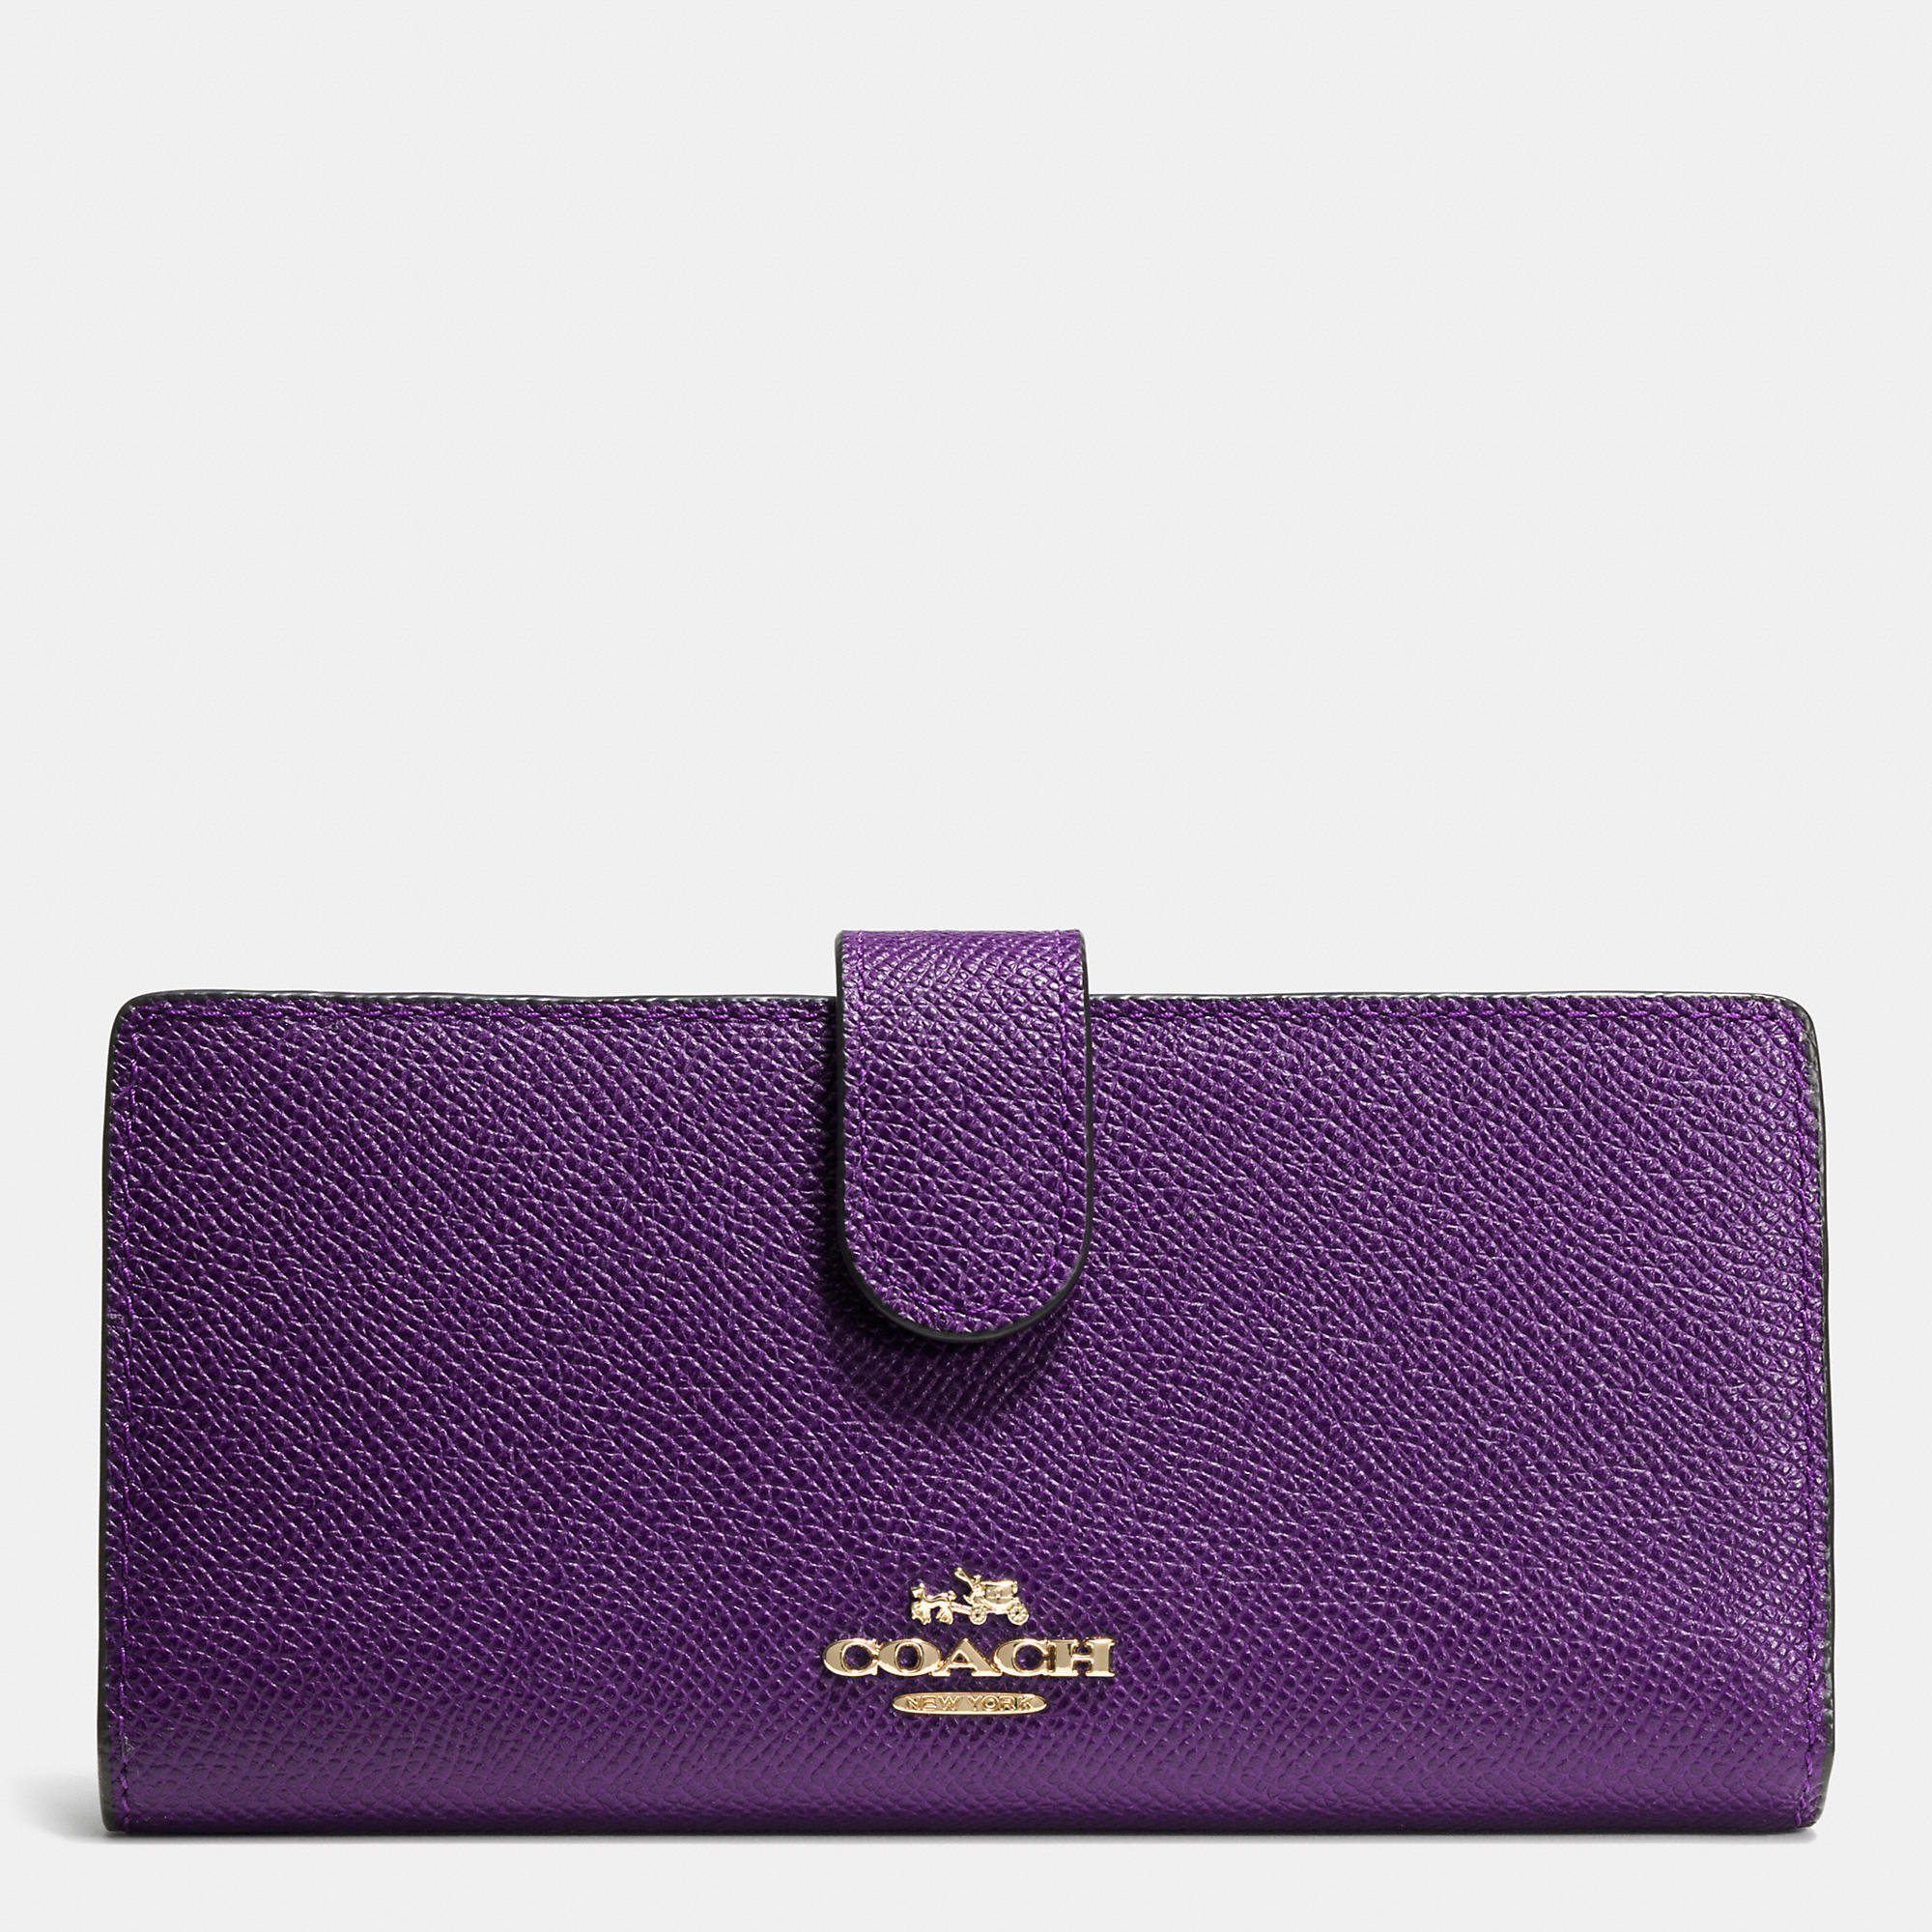 COACH Skinny Wallet In Embossed Textured Leather in Light Gold/Violet (Purple) - Lyst